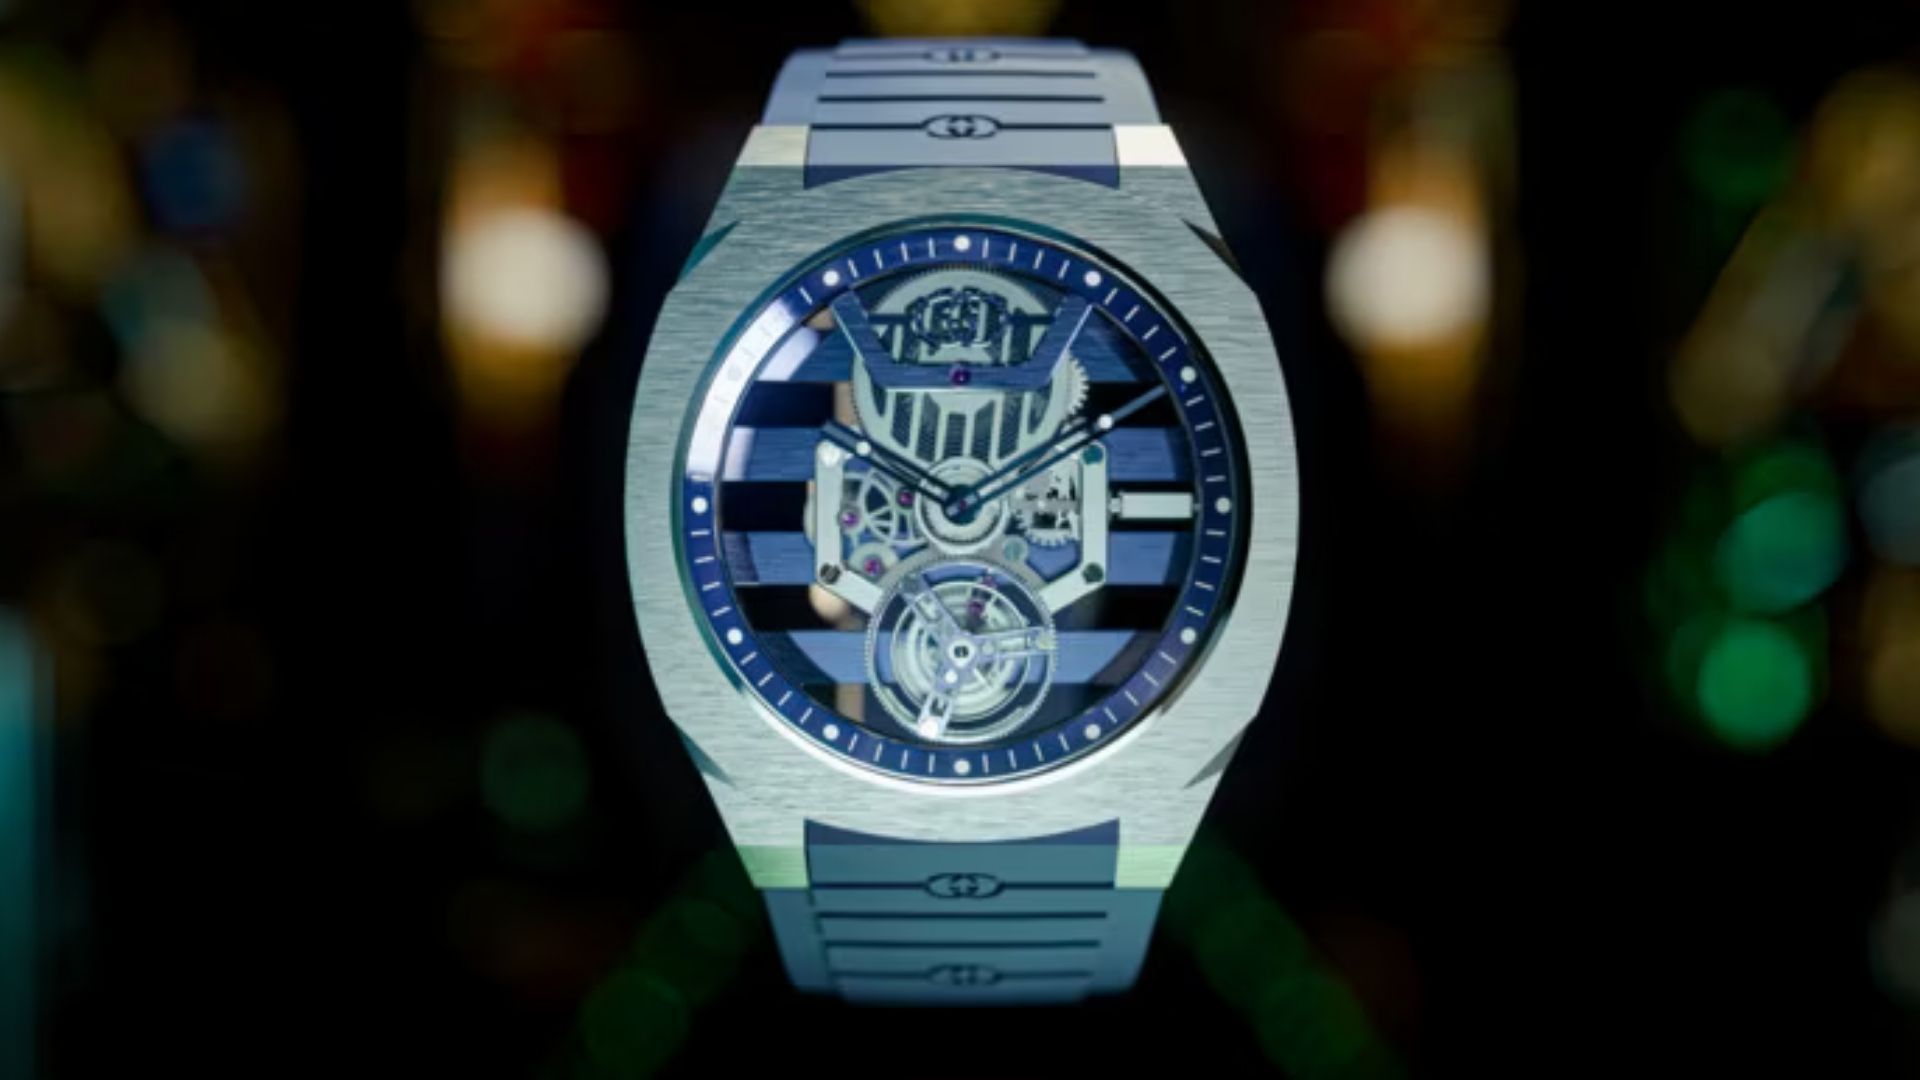 Gucci 'High Watchmaking' Collection: GUCCI 25H Skeleton Tourbillon